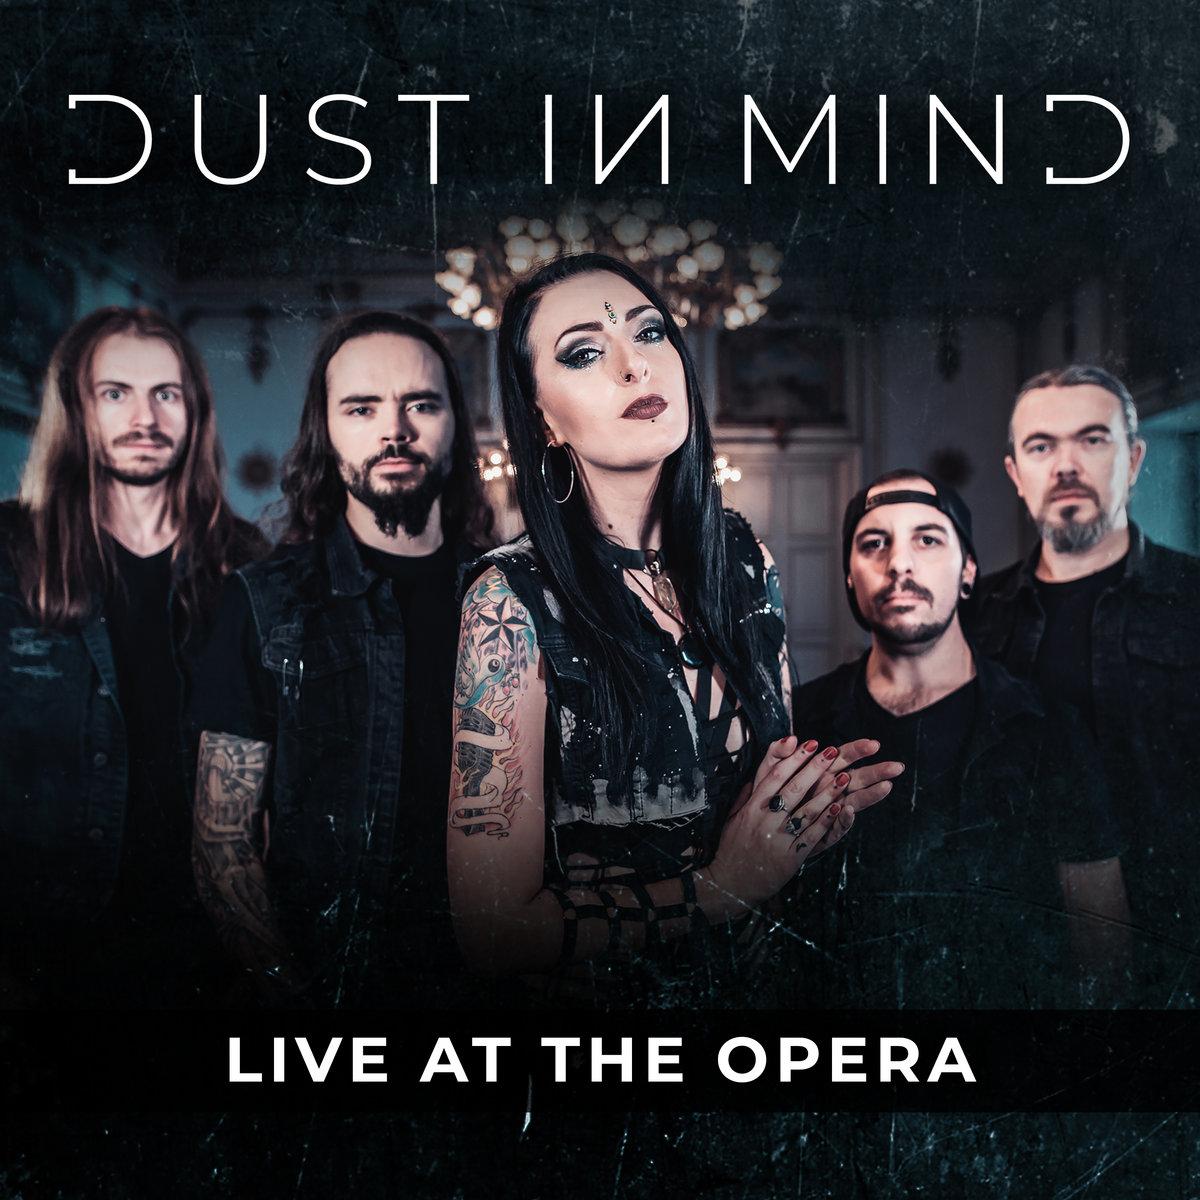 Dust in mind live